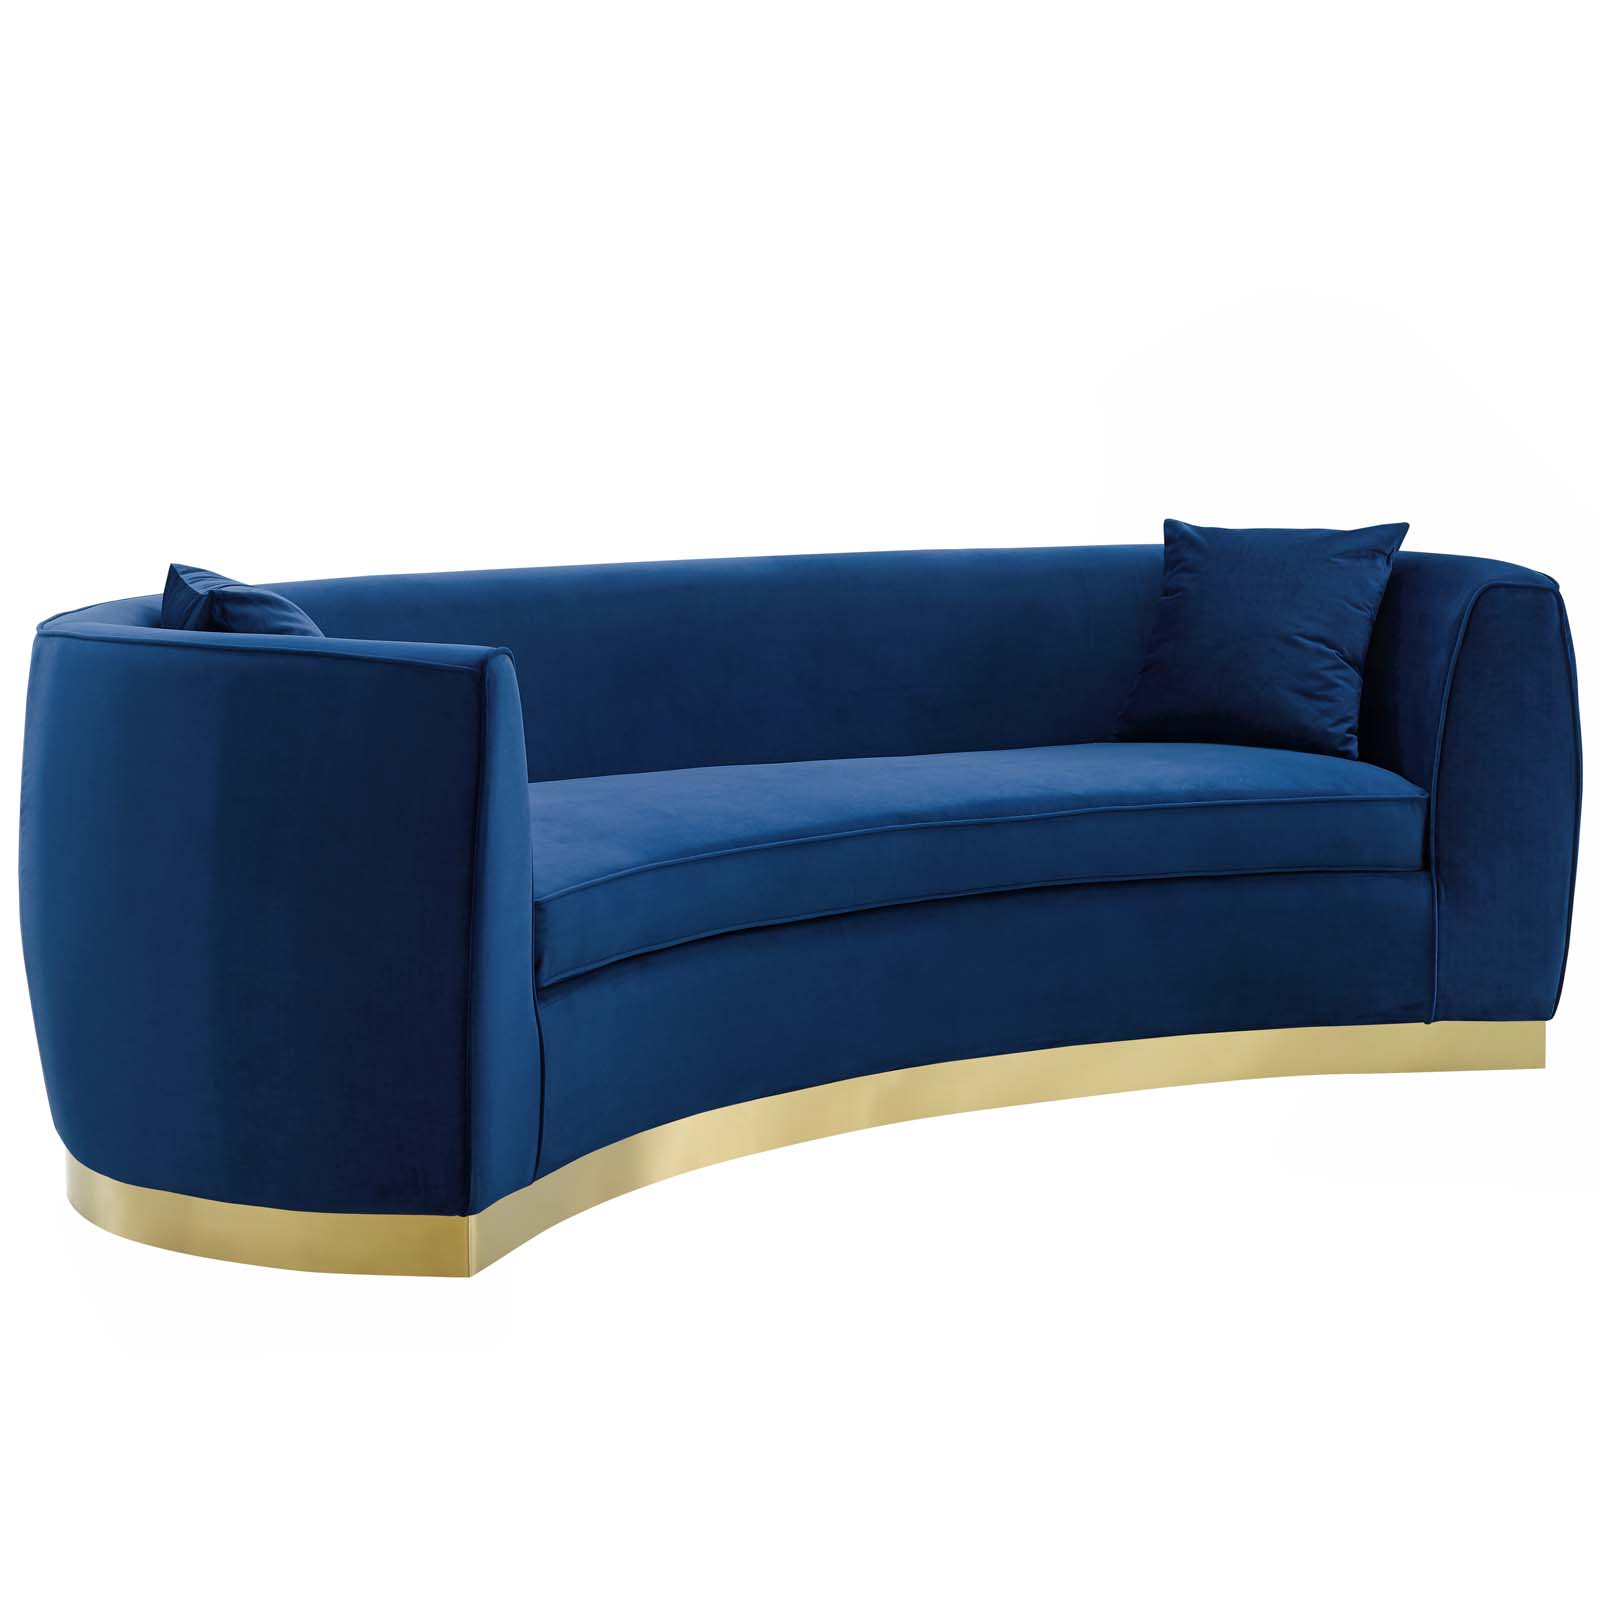 Modway Resolute Curved Performance Velvet Stainless Steel Sofa in Navy - image 2 of 6